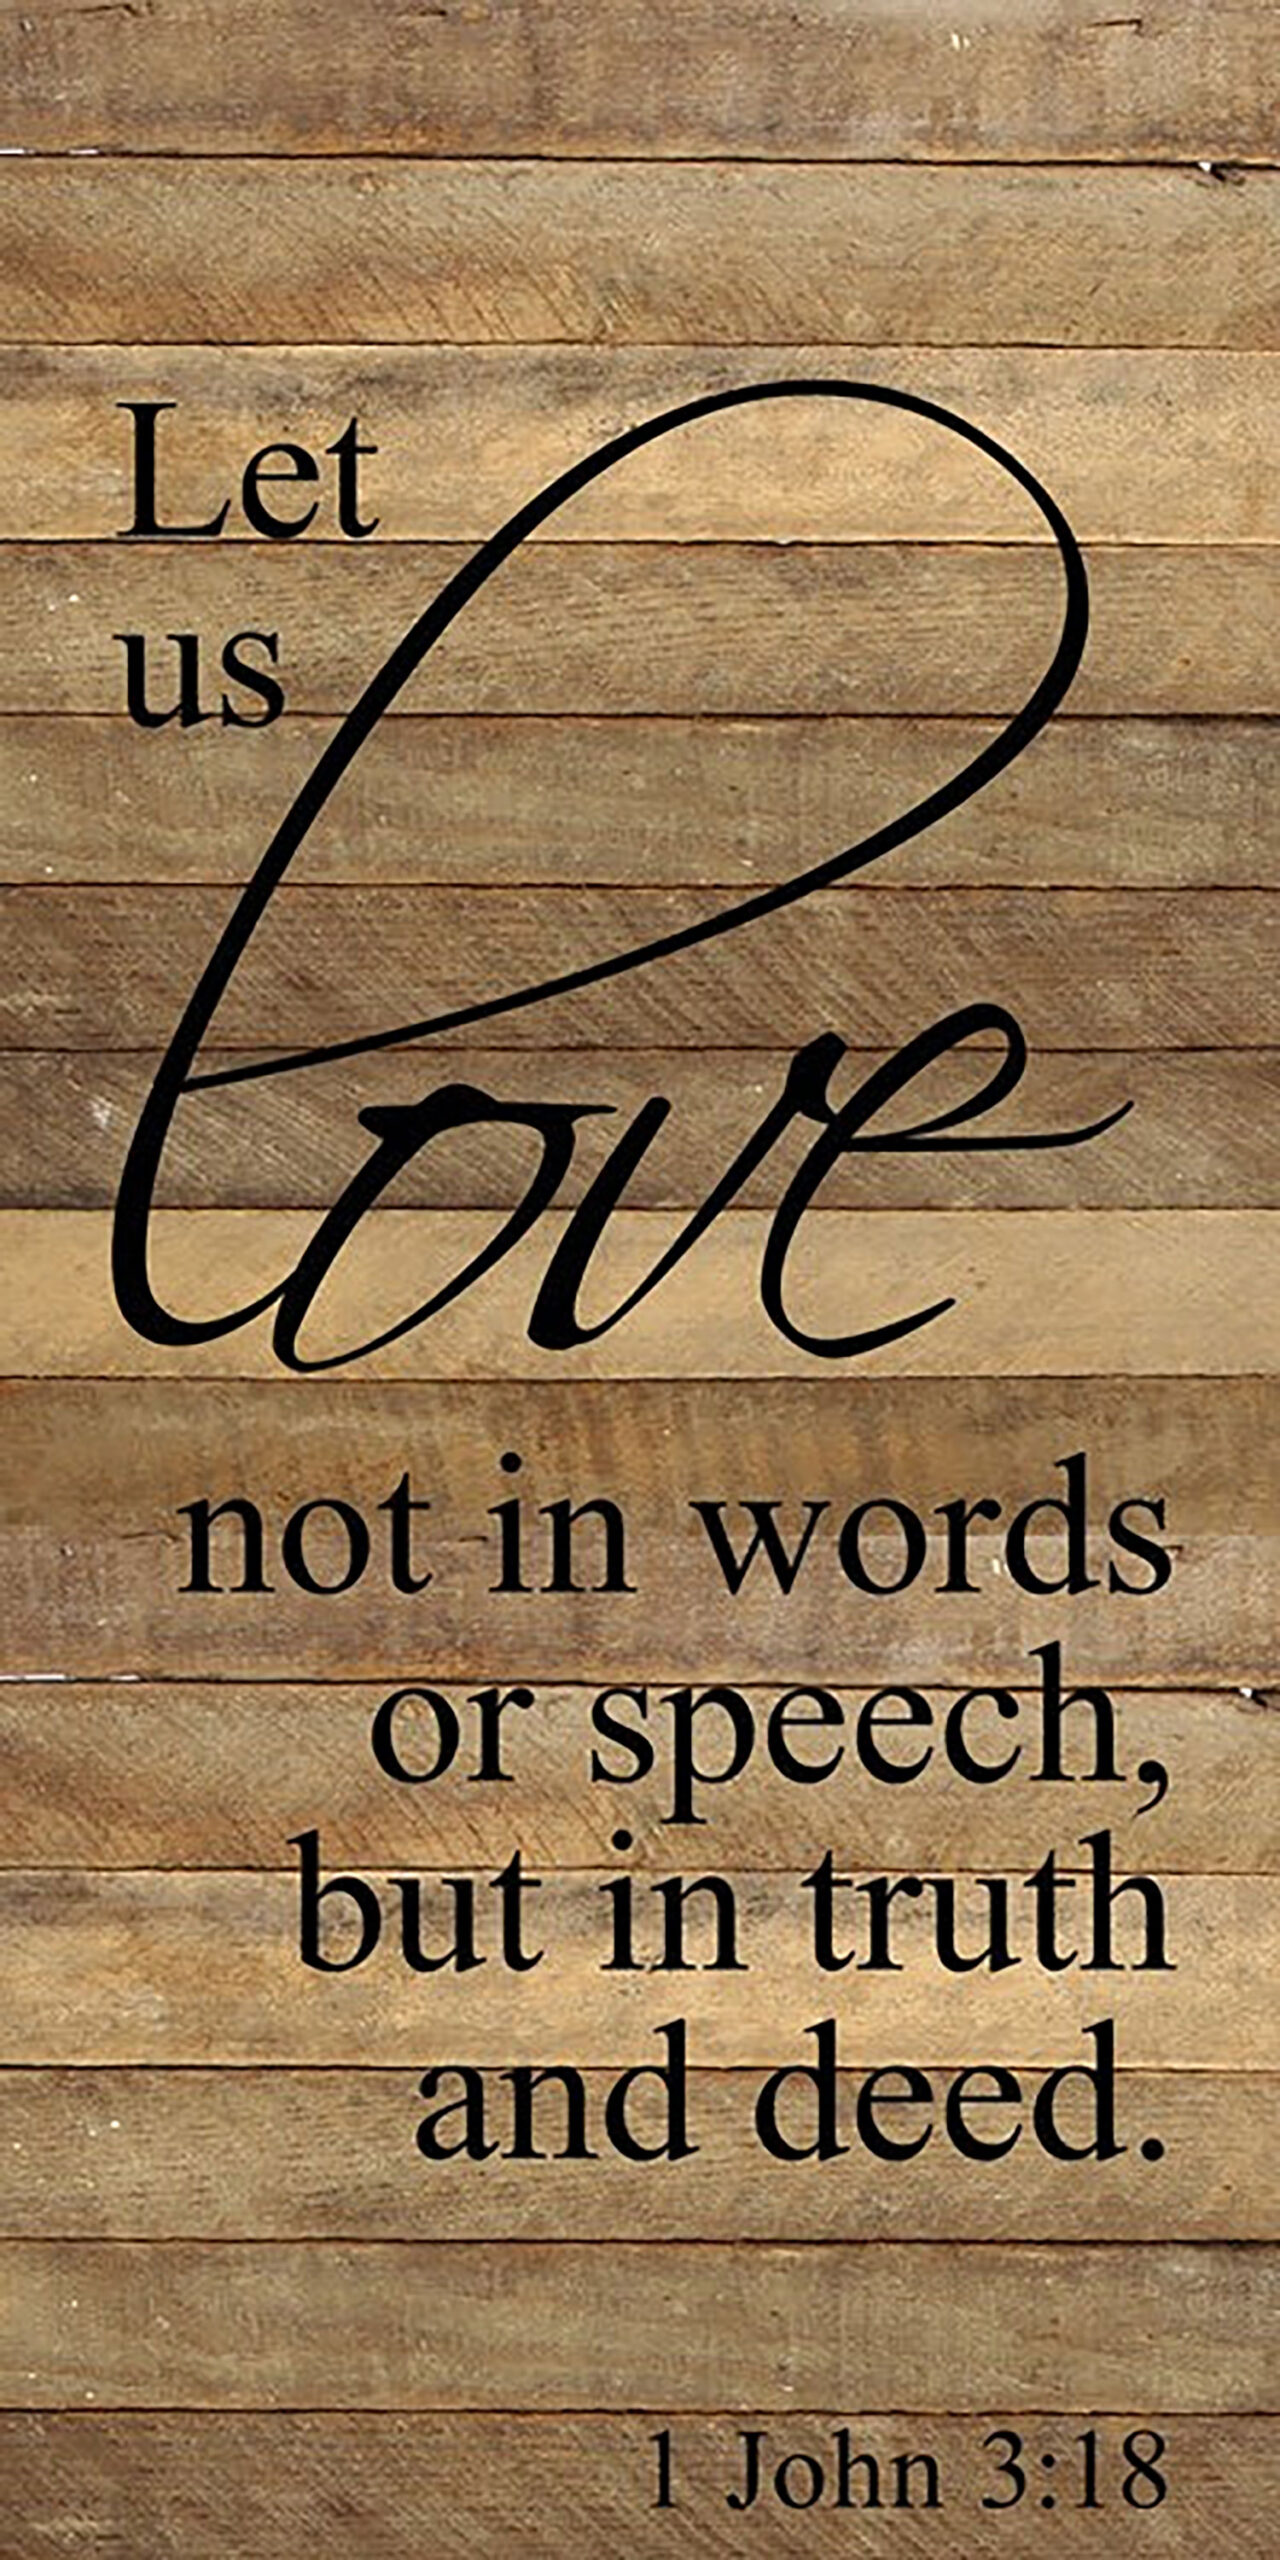 Let us love not in words or speech, but in truth and deed. 1 John 3:18 / 12"x24" Reclaimed Wood Sign